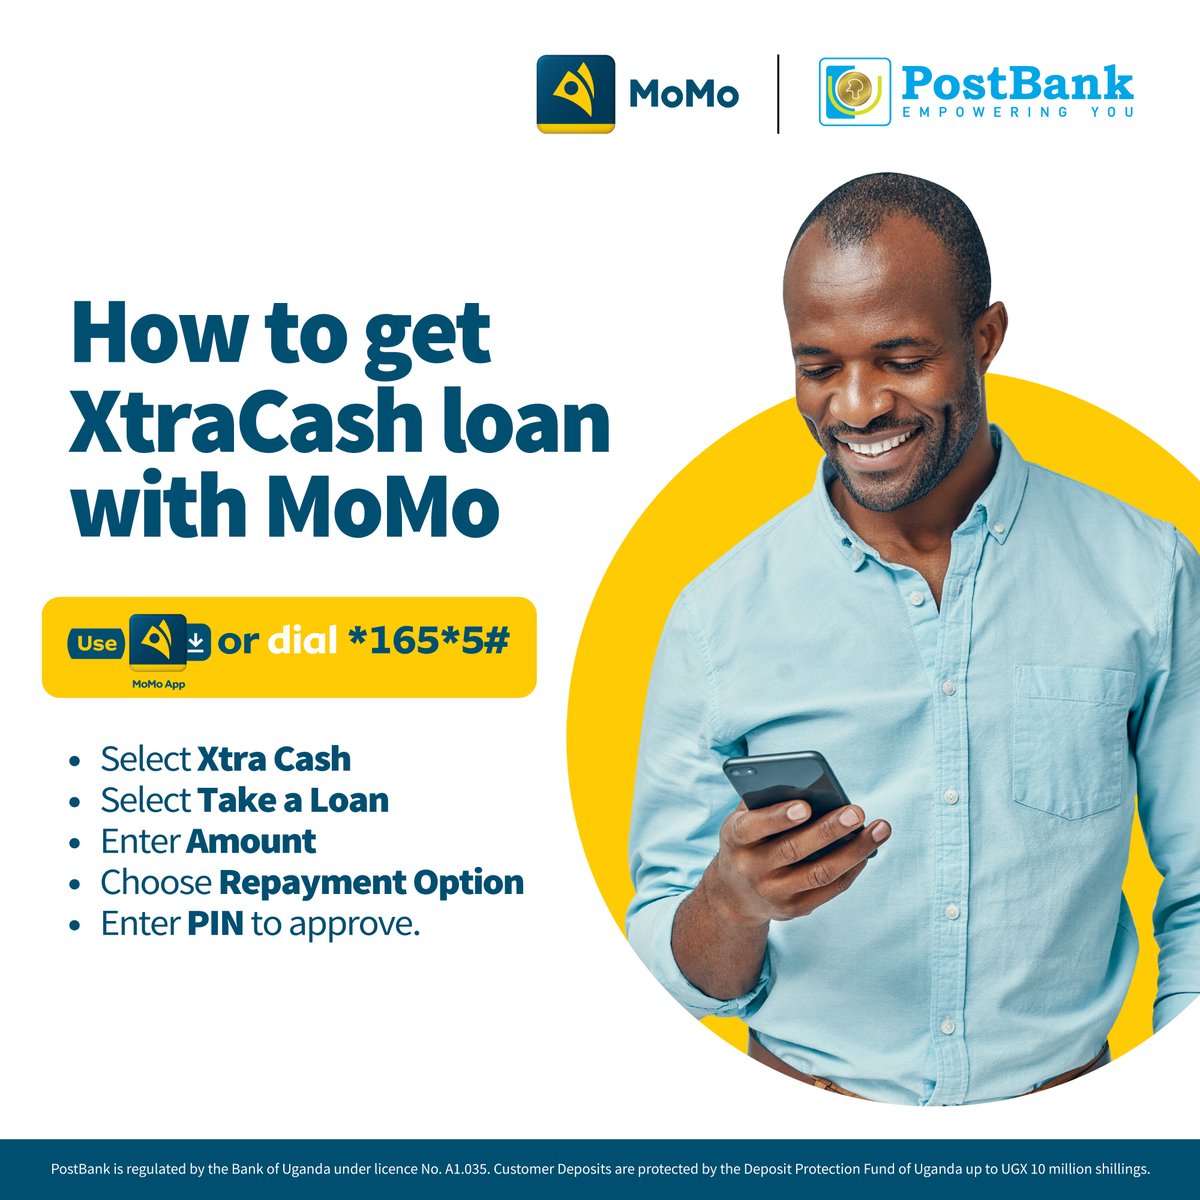 Is your Monday not mathing up? Give your budget a boost with an XtraCash loan from Momo and PostBank. It's instant and convenient, just the extra help you need. Dial *165*5# to get started. #MoneyMonday #XtraCash #Momo #PostBankUg #EmpoweringYou. @mtnug